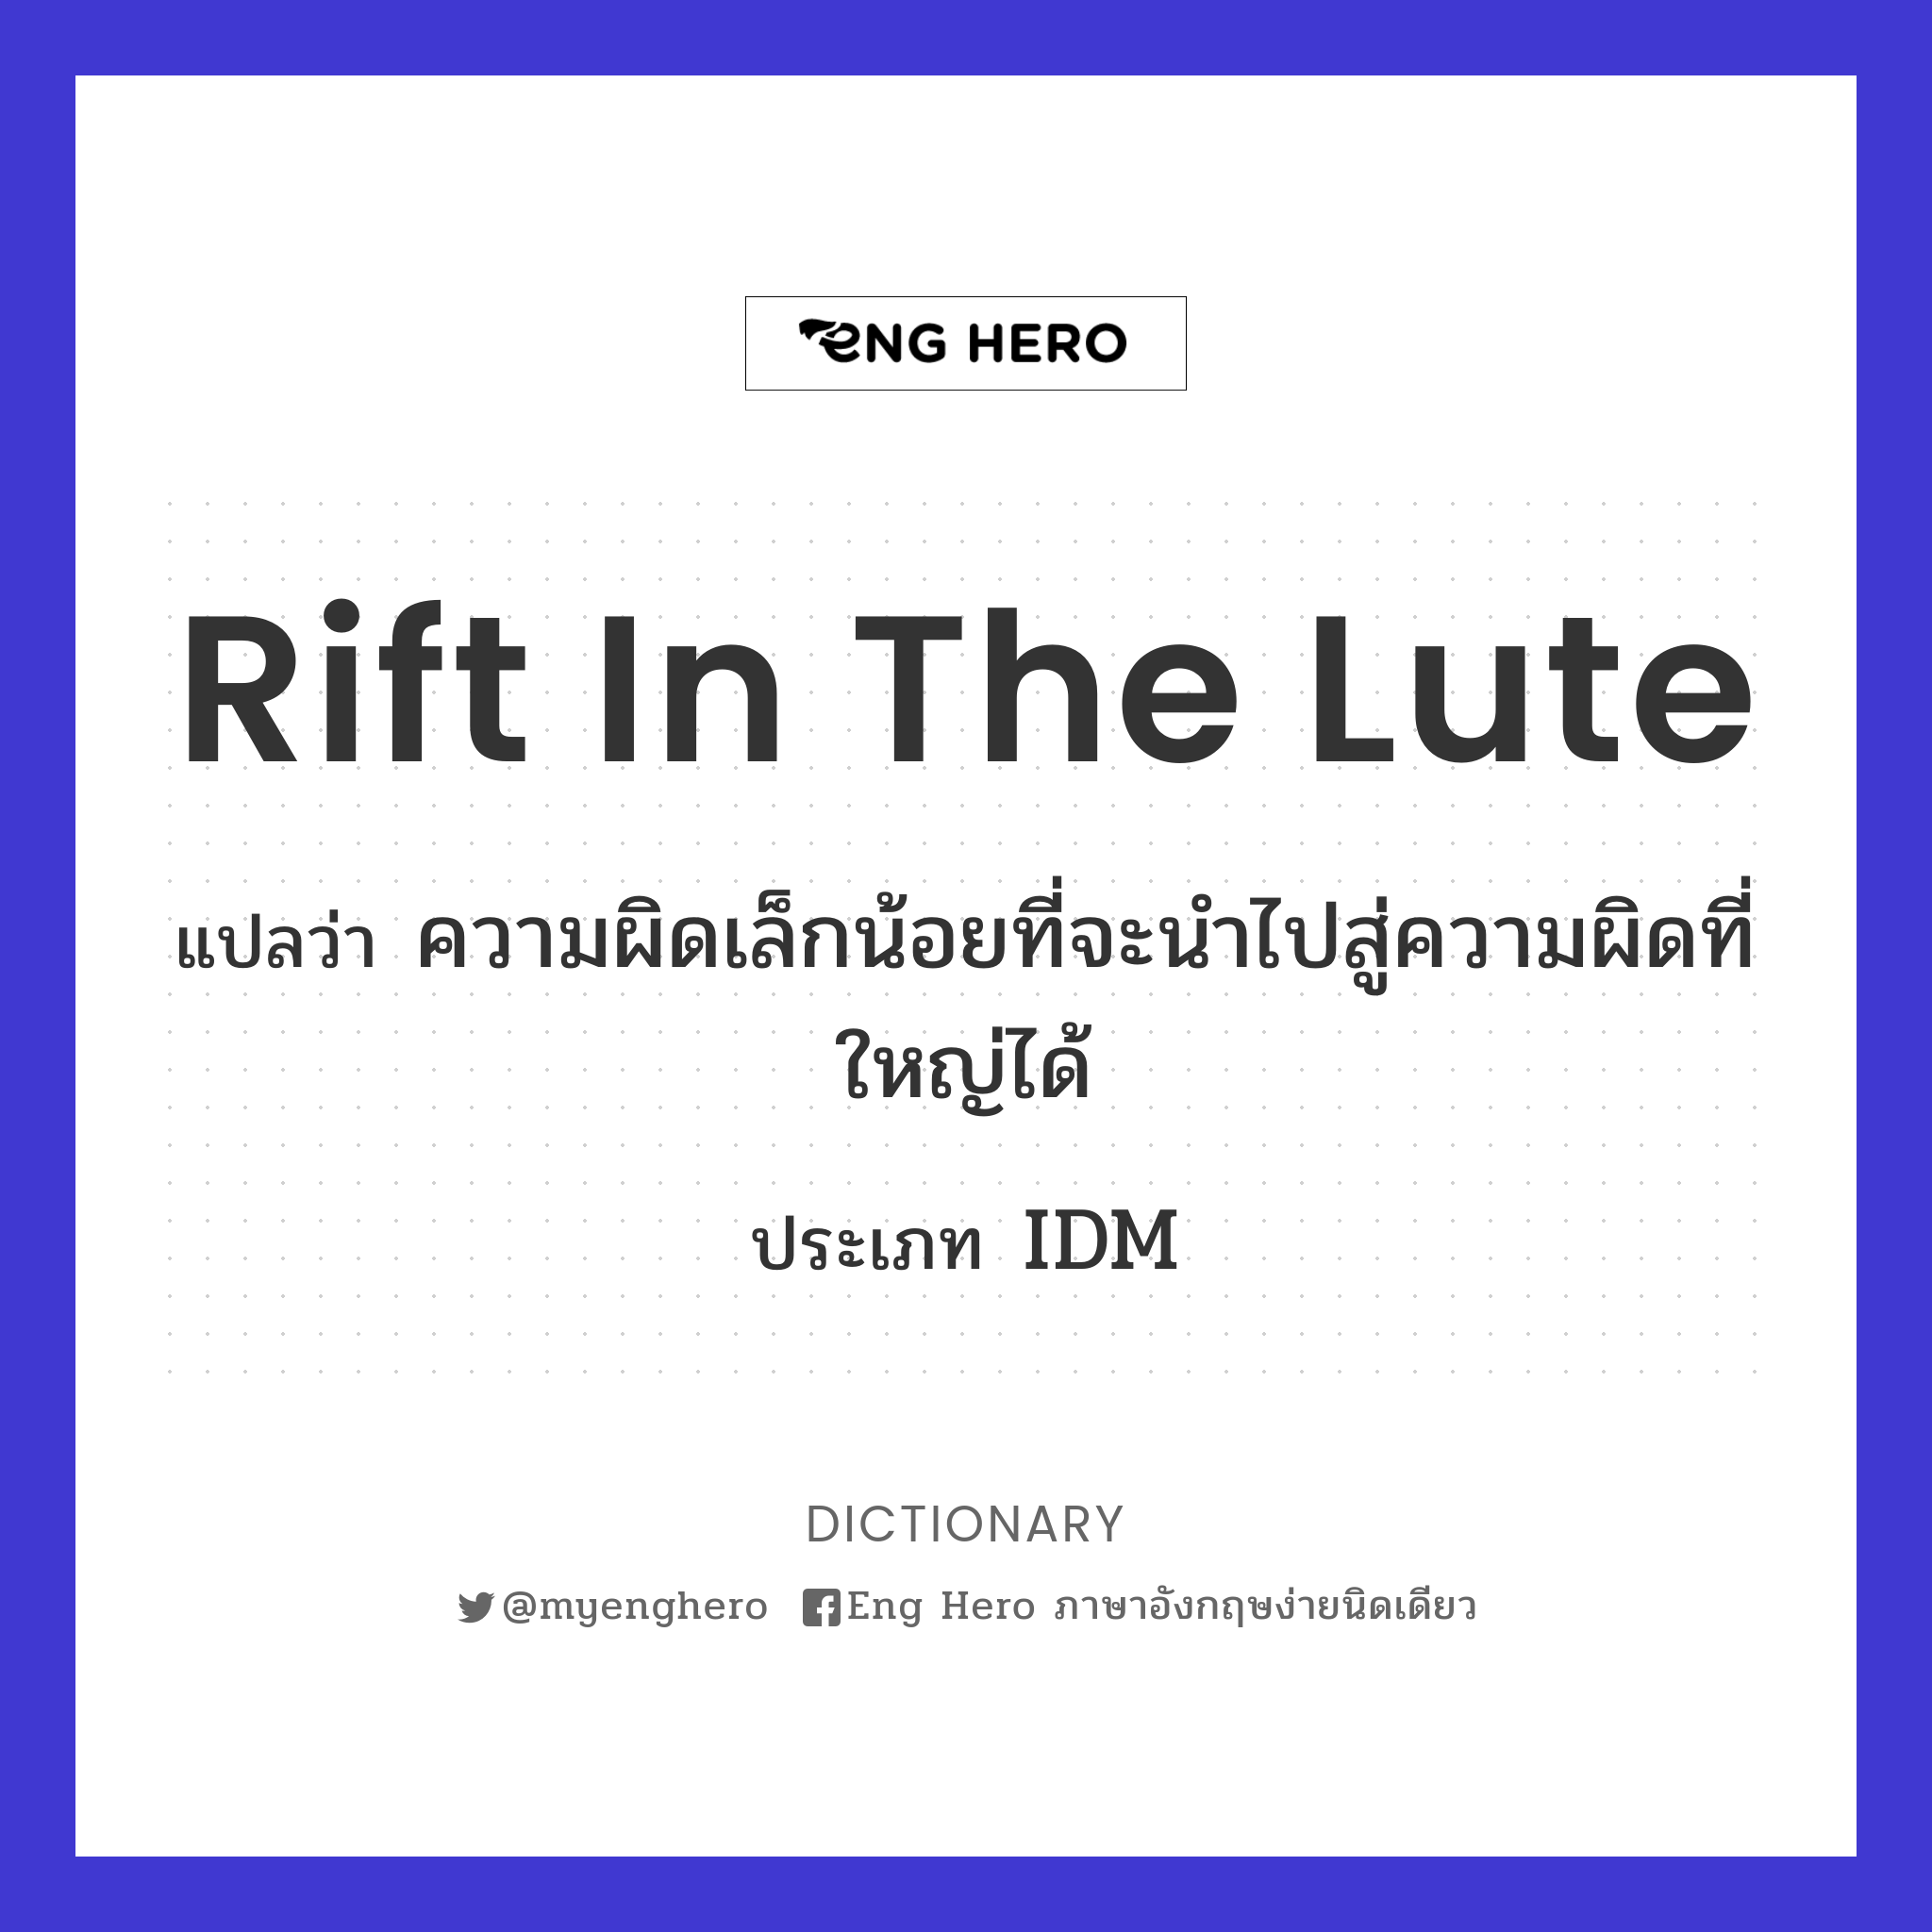 rift in the lute